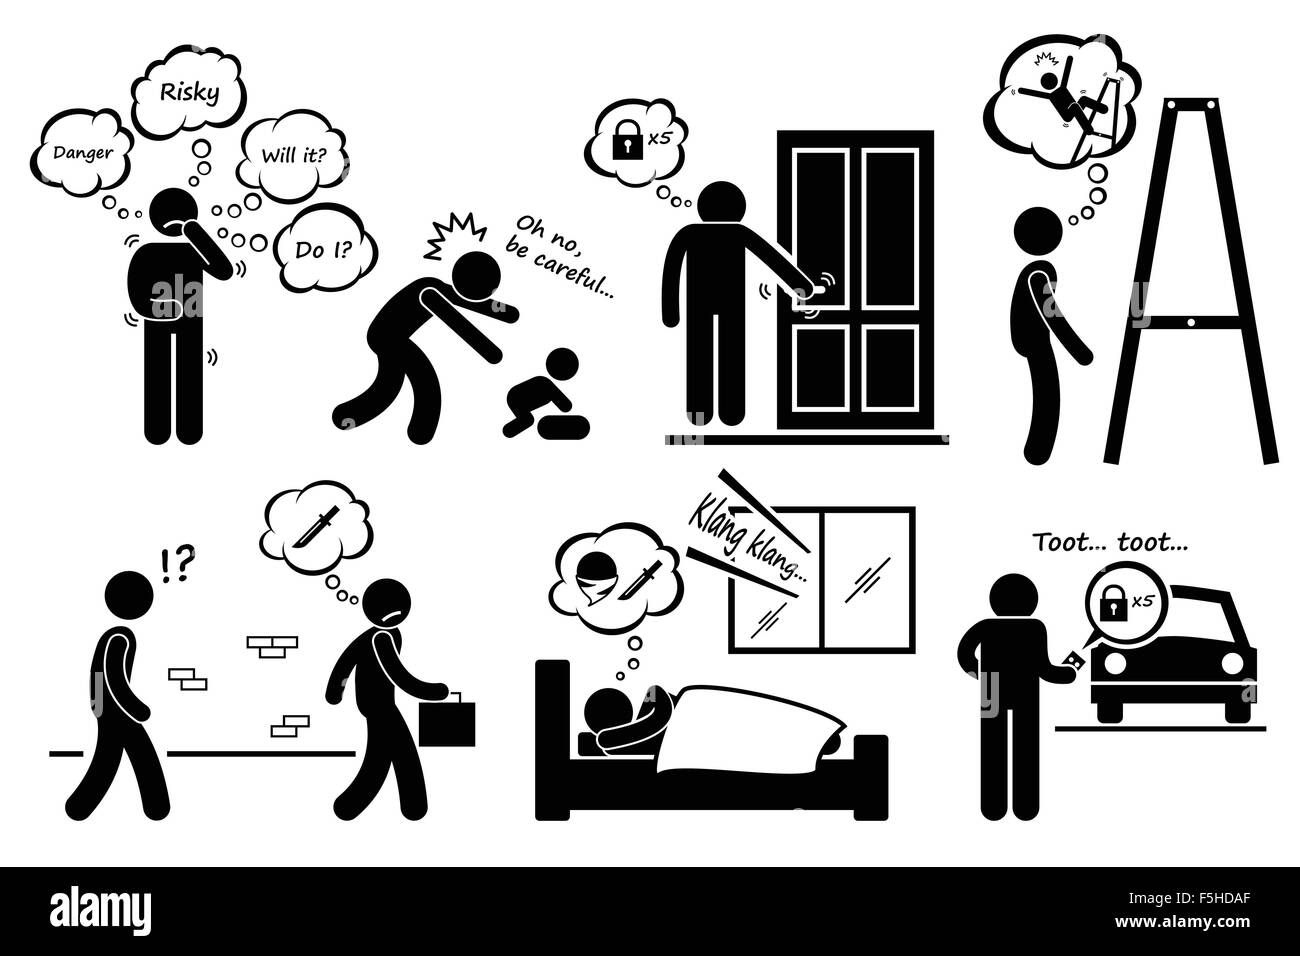 Paranoid Paranoia People Too Worry Stick Figure Pictogram Icons Stock Vector